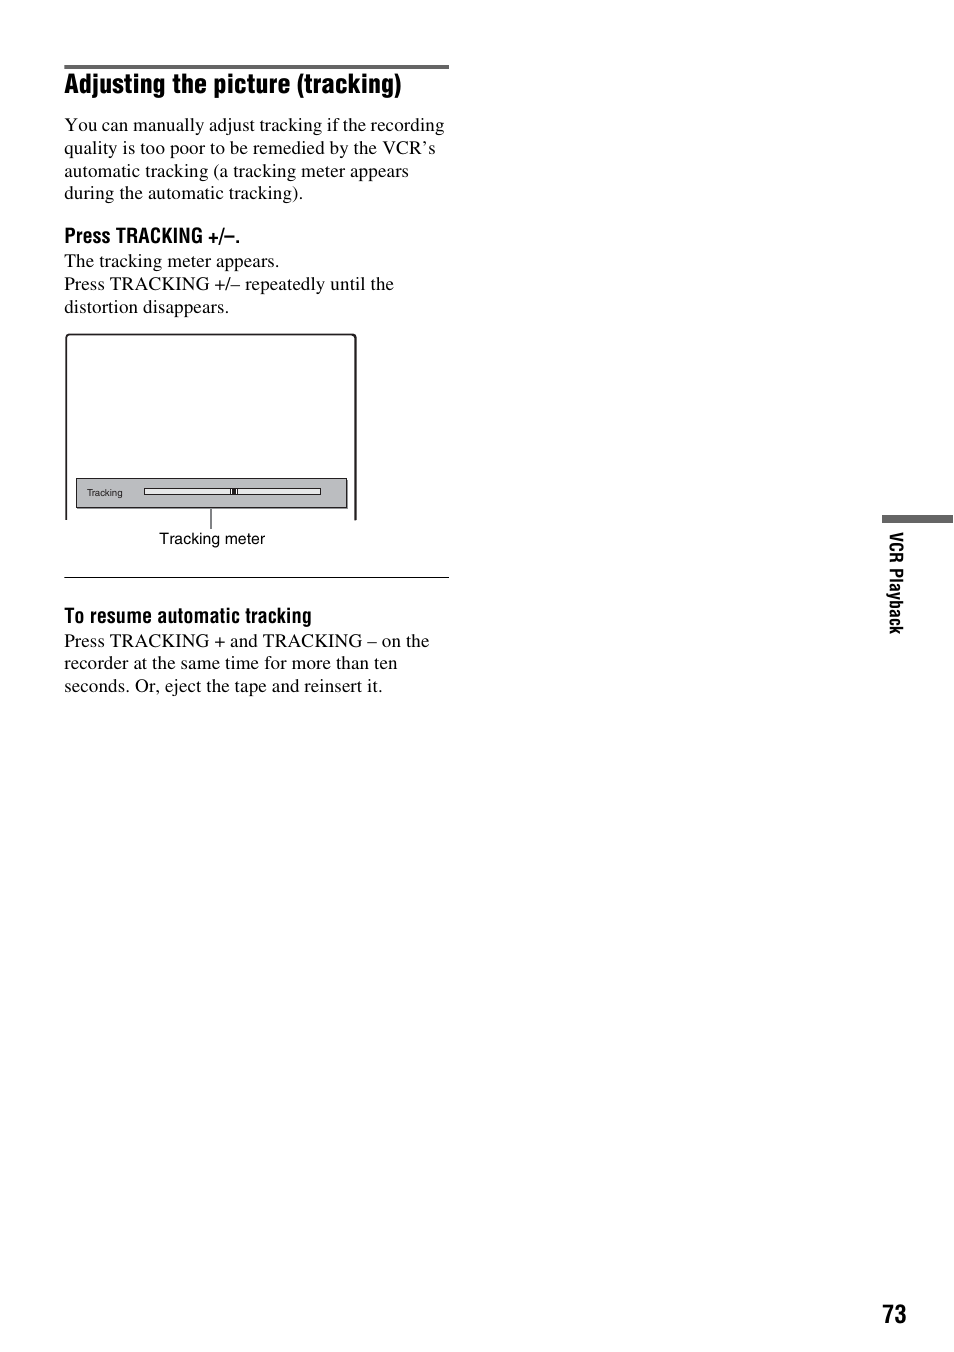 Adjusting the picture (tracking) | Sony RDR-VX521 User Manual | Page 73 / 132